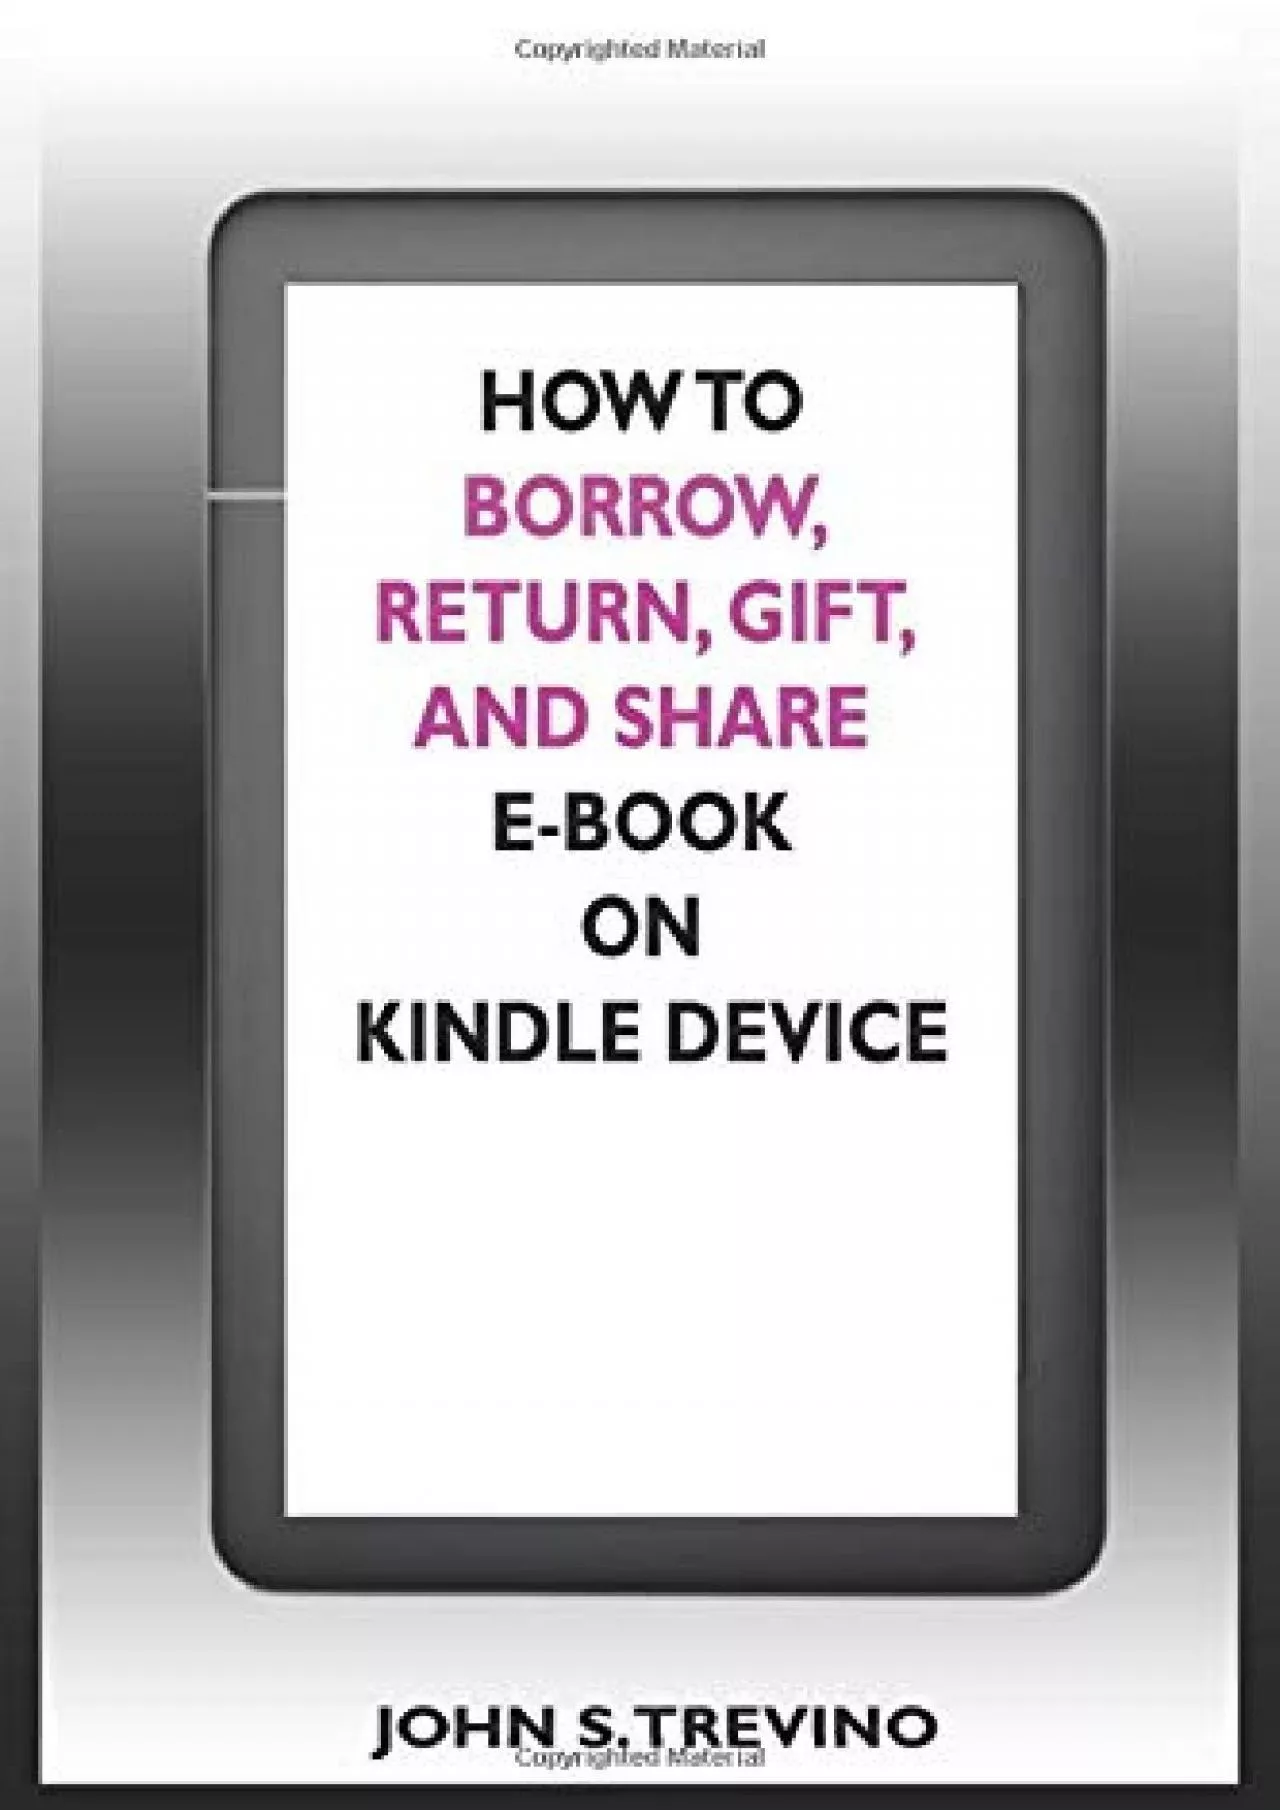 [eBOOK]-HOW TO BORROW, RETURN, GIFT, SHARE E-BOOK ON KINDLE DEVICE: A Complete Step By